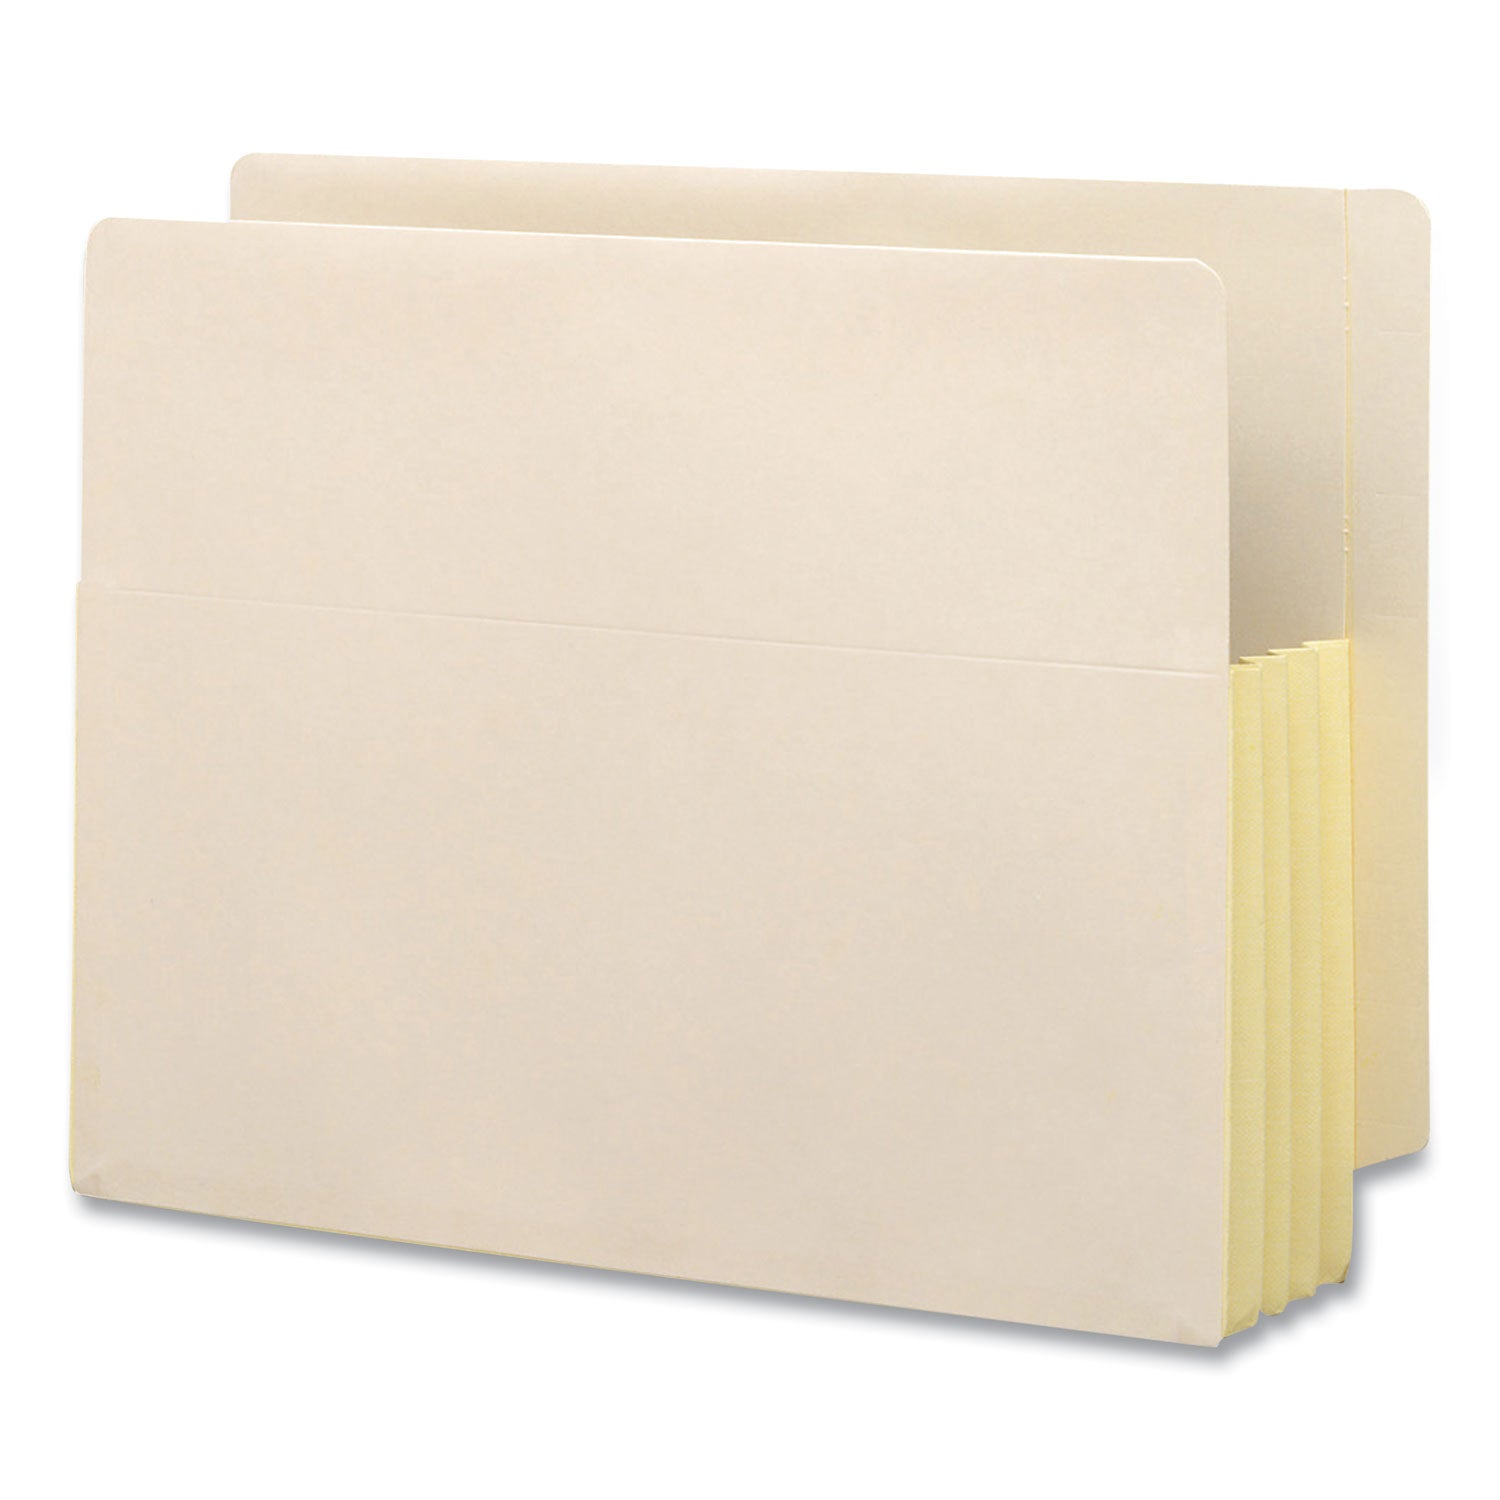 Manila End Tab File Pockets with Tyvek-Lined Gussets, 3.5" Expansion, Letter Size, Manila, 10/Box - 